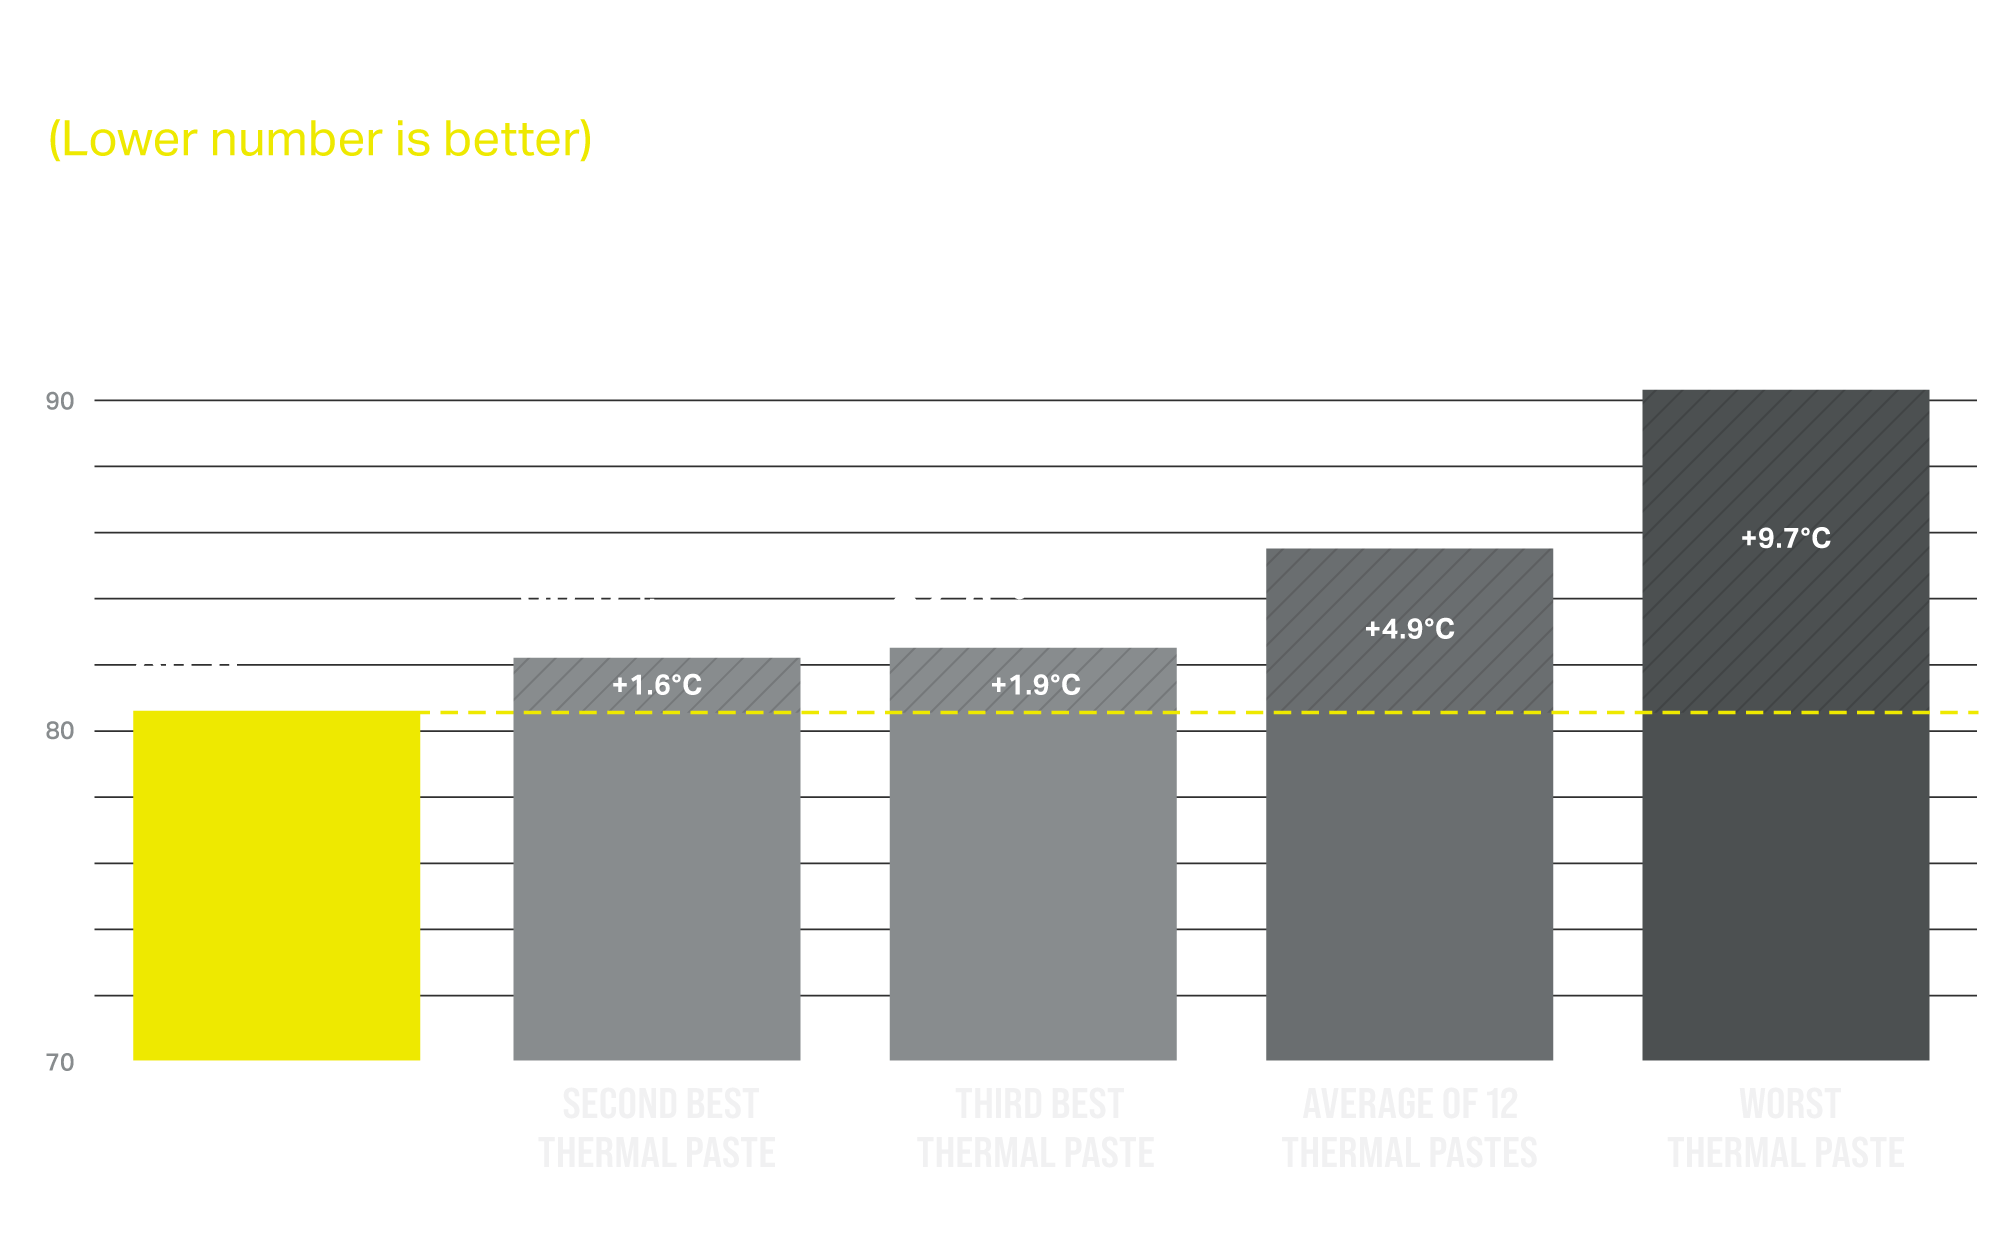 A comparison of XTM70 thermal paste to competitors.